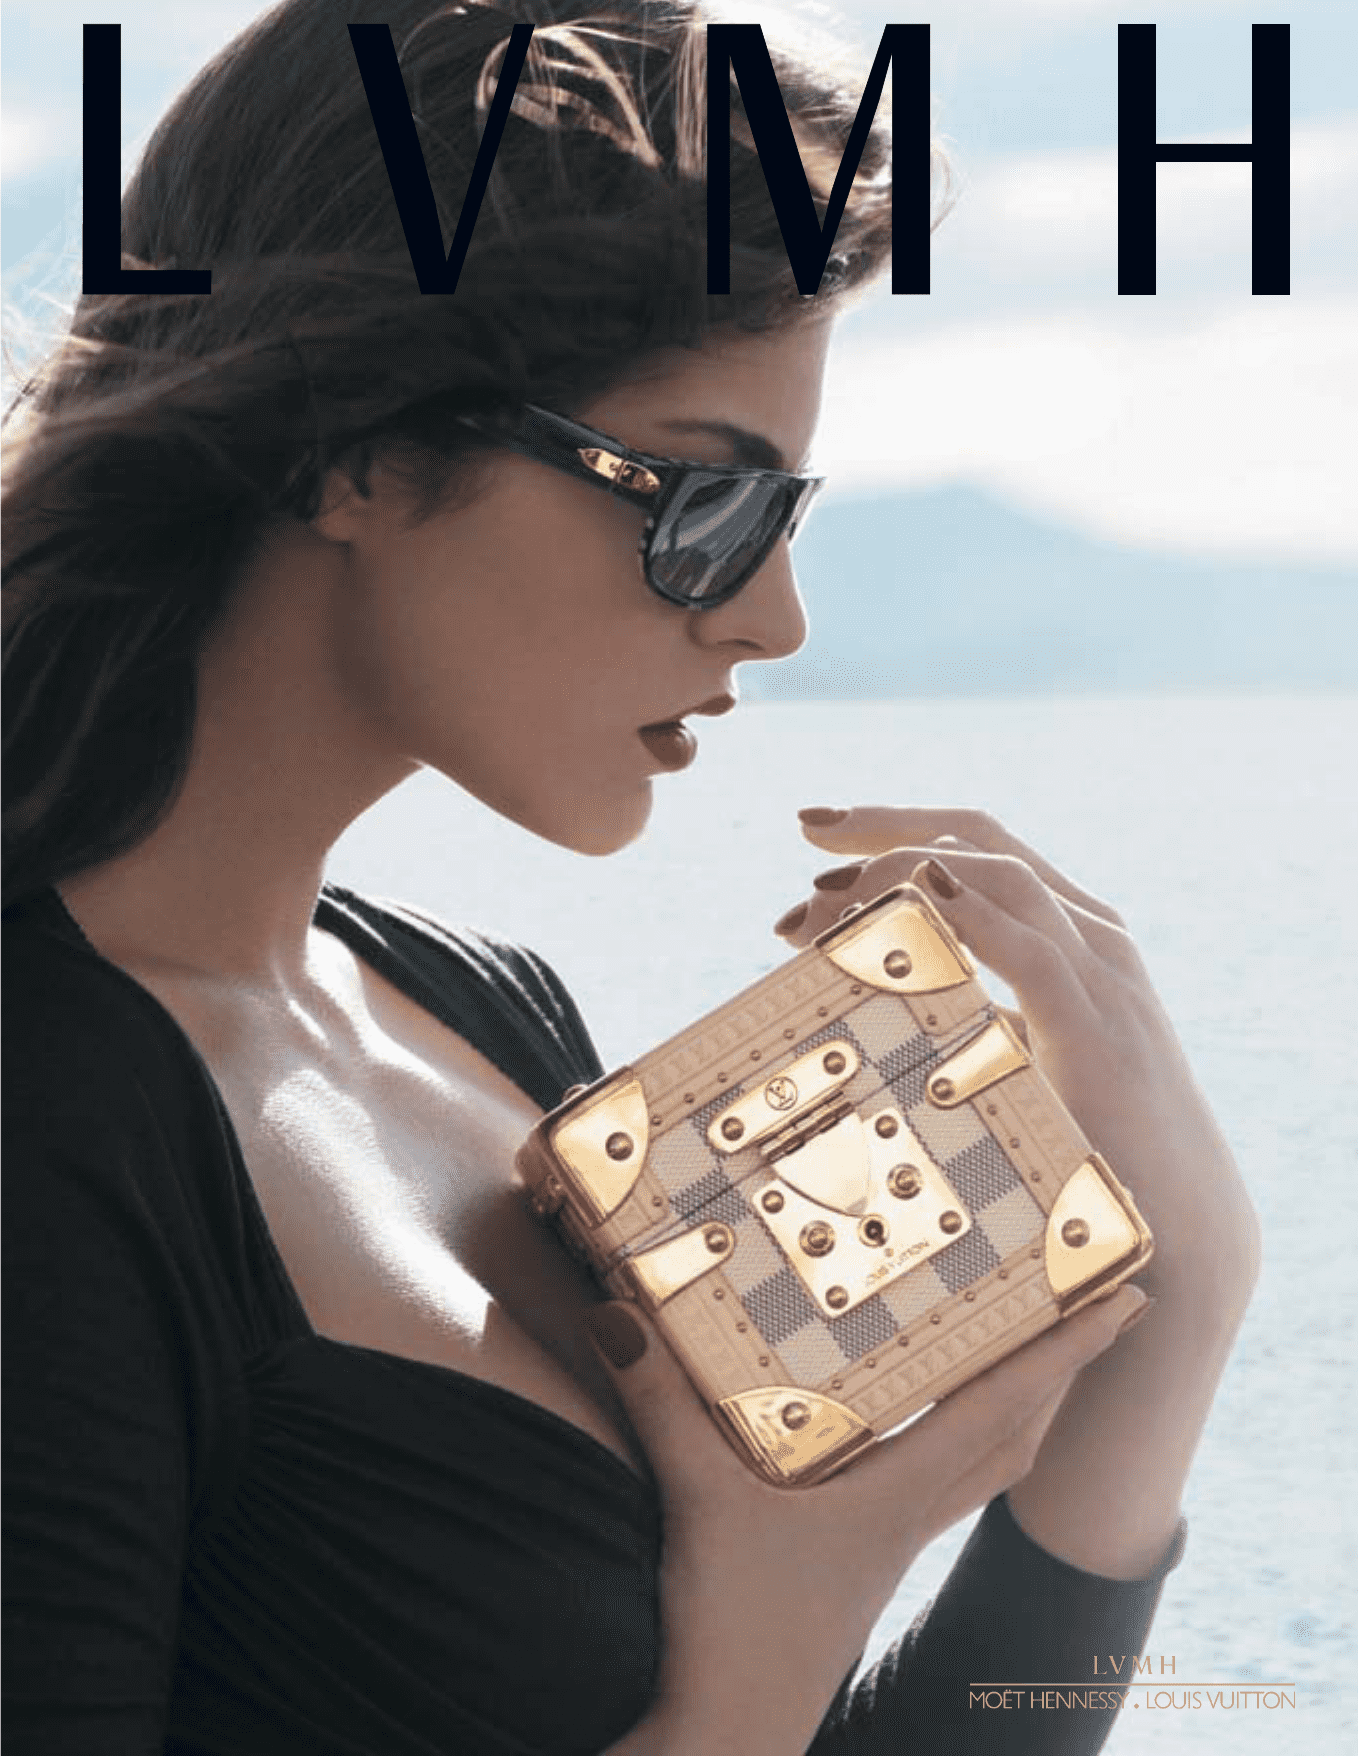 Louis Vuitton Moet Hennessy Annual Report